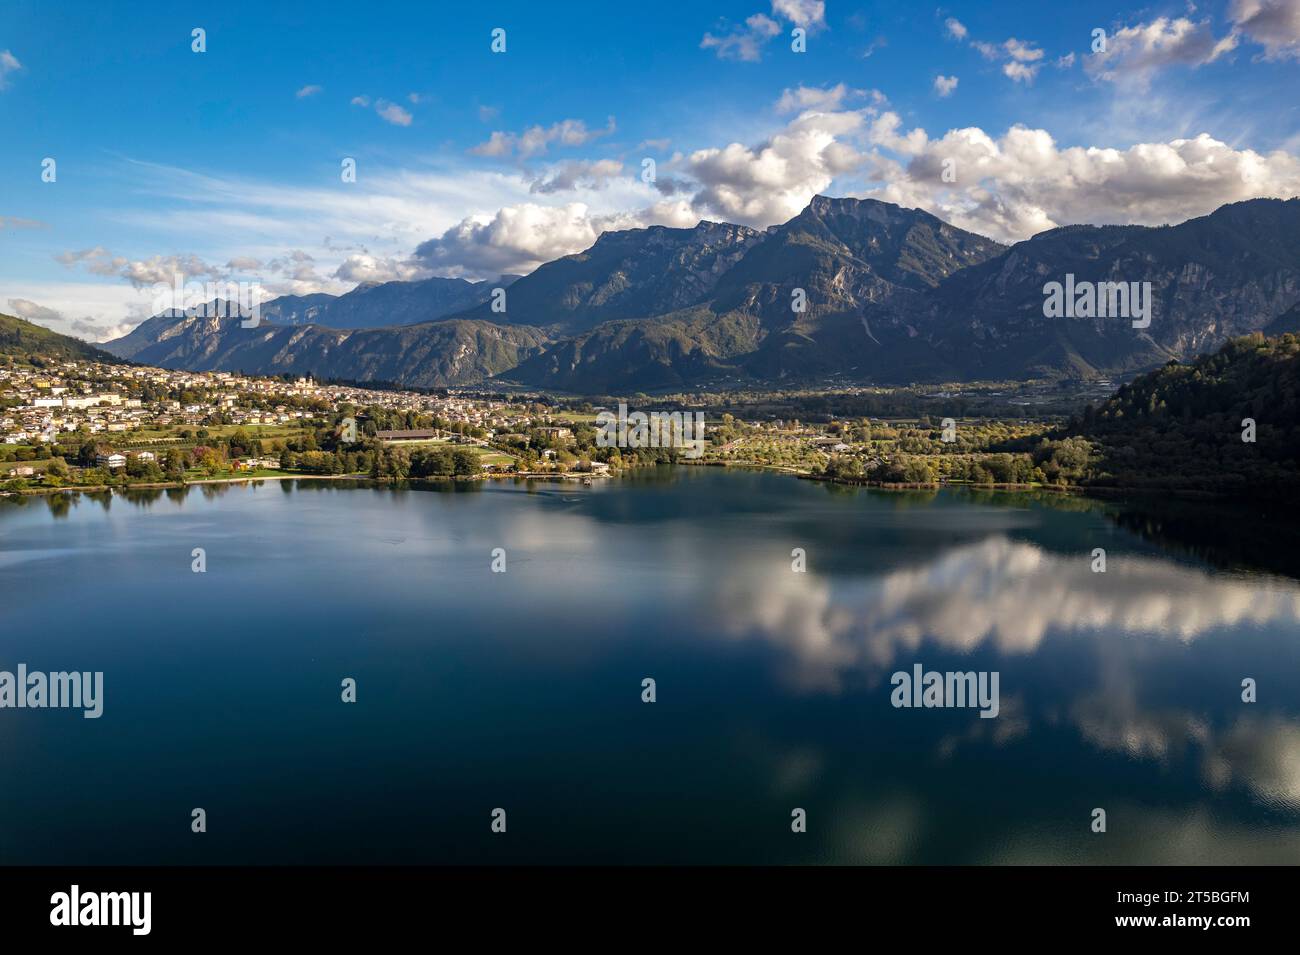 Löweneck oder Levico terme am See Lago di Levico im Valsugana, Trentino, Italien, Europa | Levico terme sur le lac Lago di Levico à Valsugana, Tren Banque D'Images